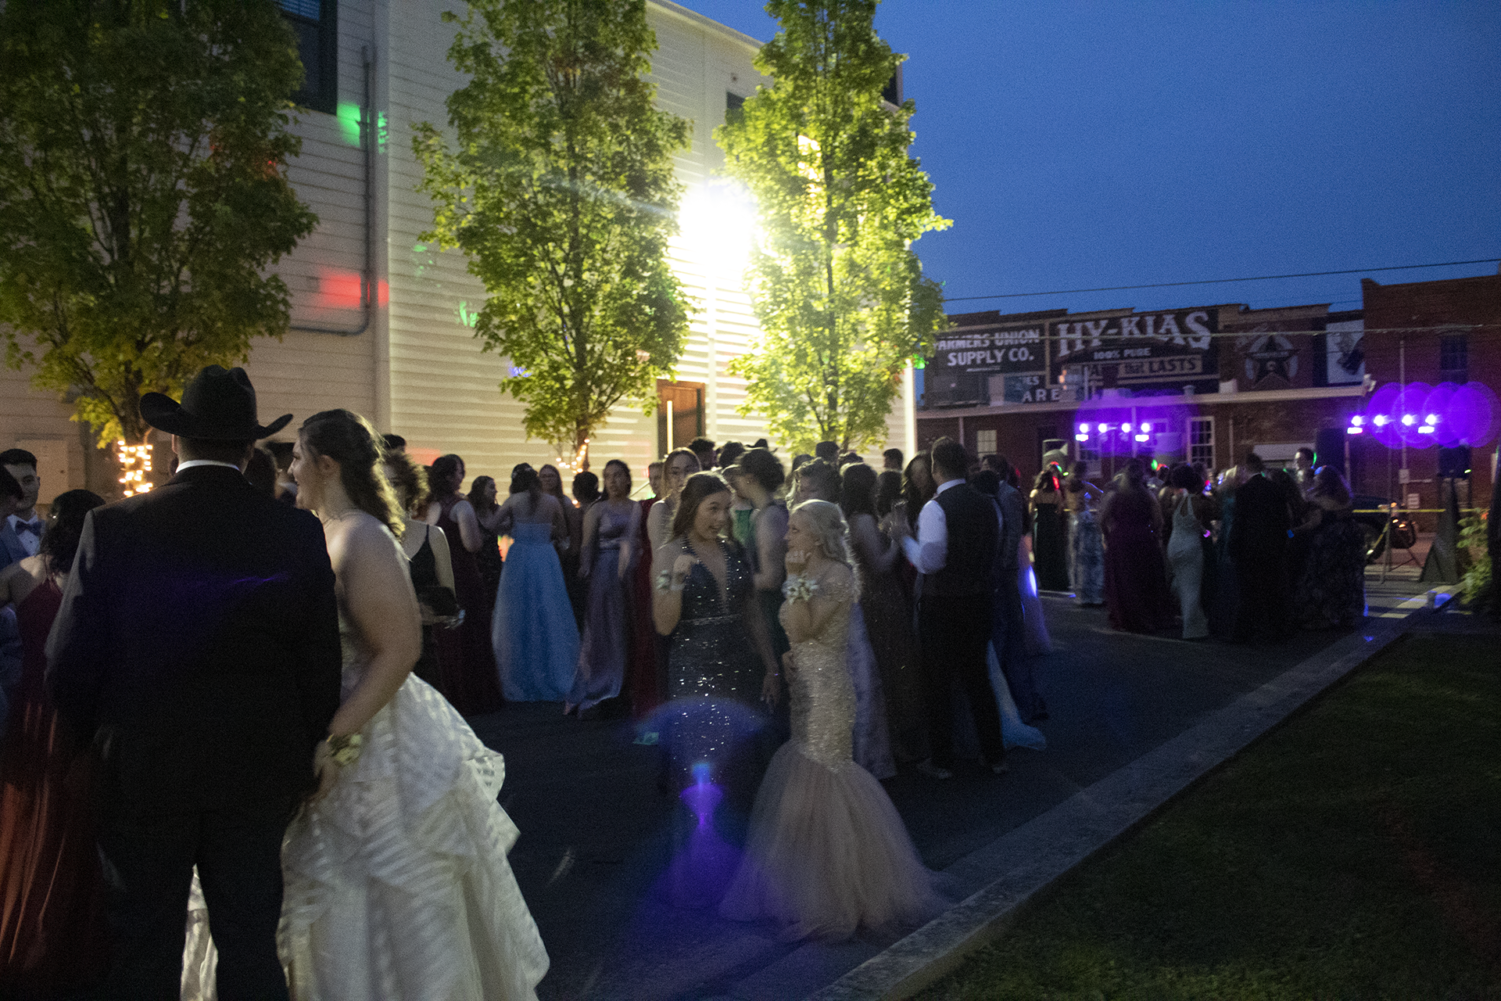 Pictures+from+Prom+2021%21